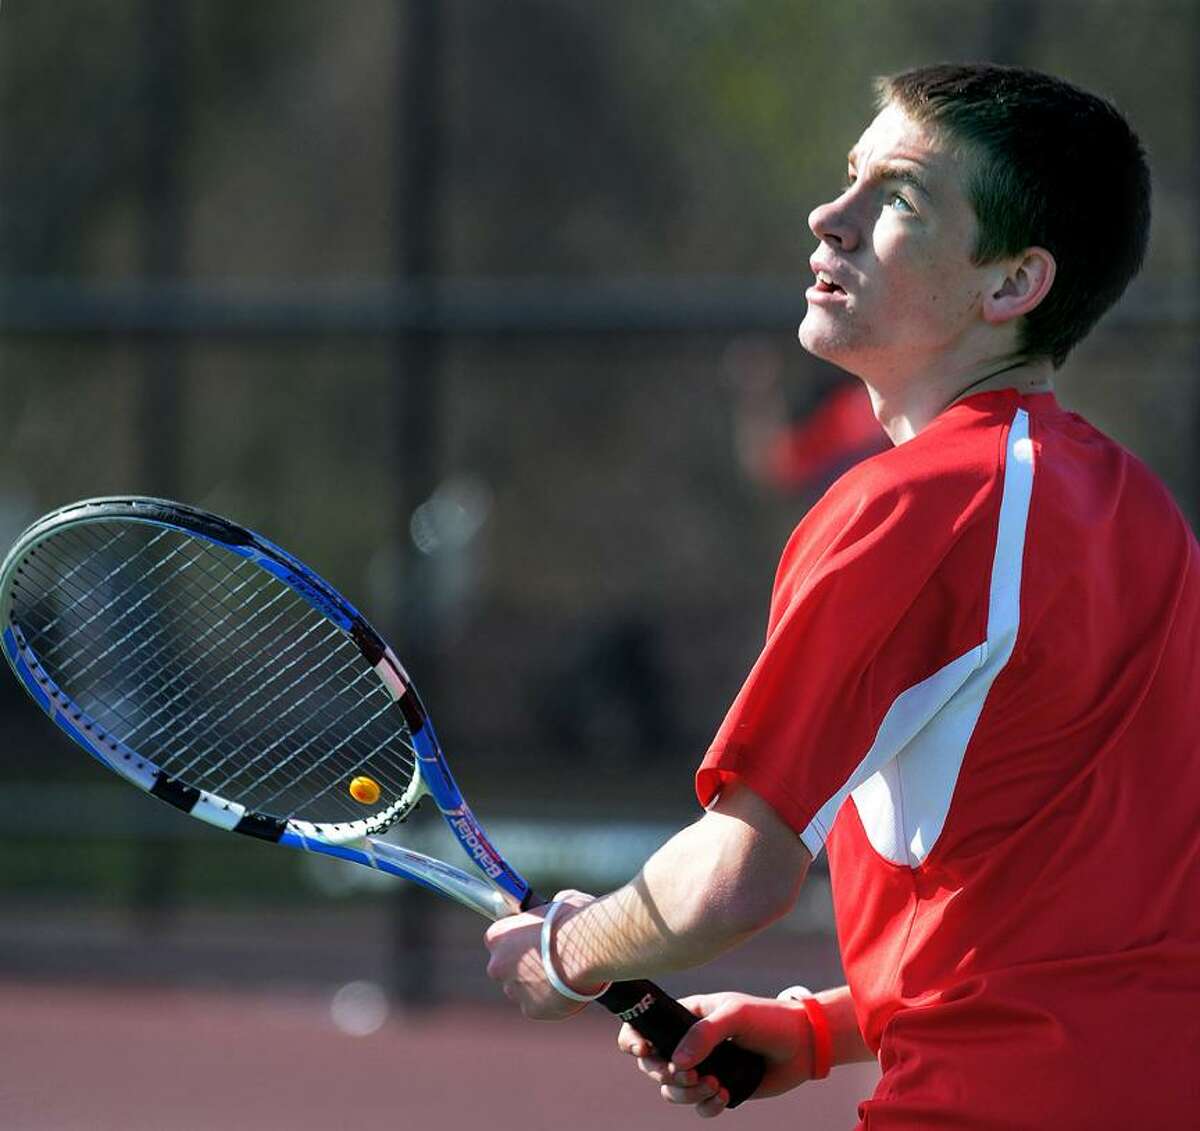 Catherine Avalone/The Middletown Press Portland senior Justin Danielewicz defeated Coginchaug's Tyler McDonald 6-0, 6-0 Monday afternoon in Portland. The Portland Highlanders defeated the Coginchaug Blue Devils 6-1.